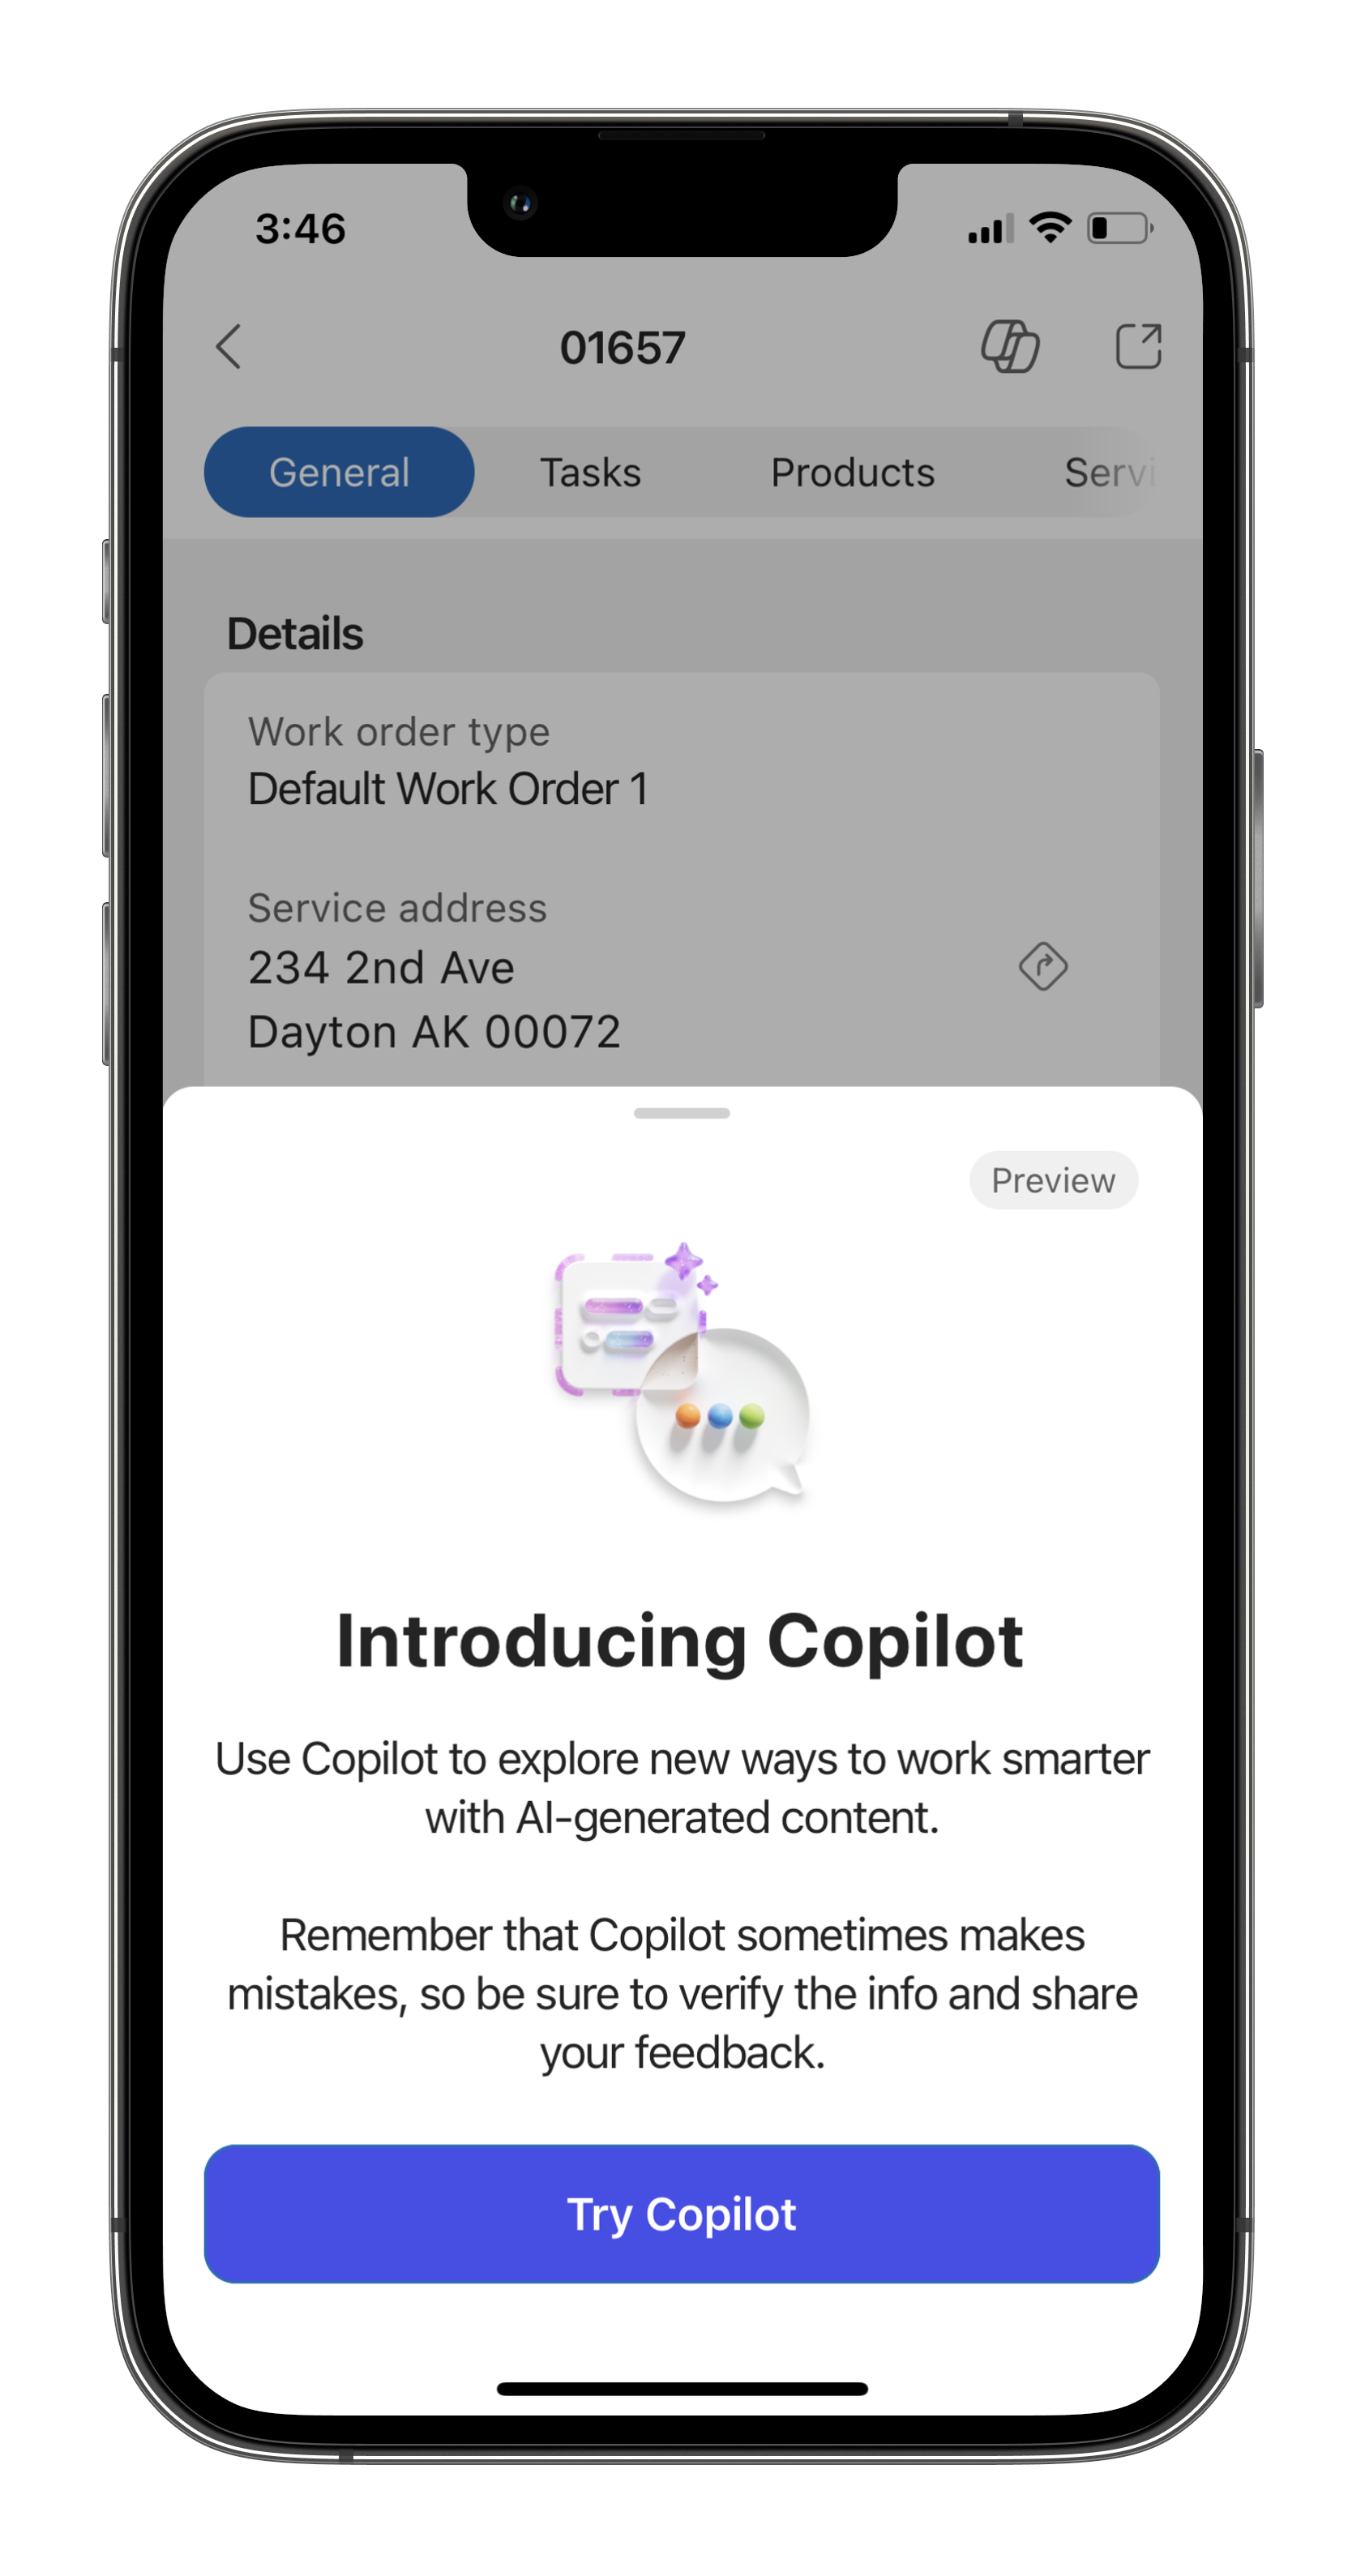 Experience the power of Copilot in Dynamics 365 Field Service in the mobile application